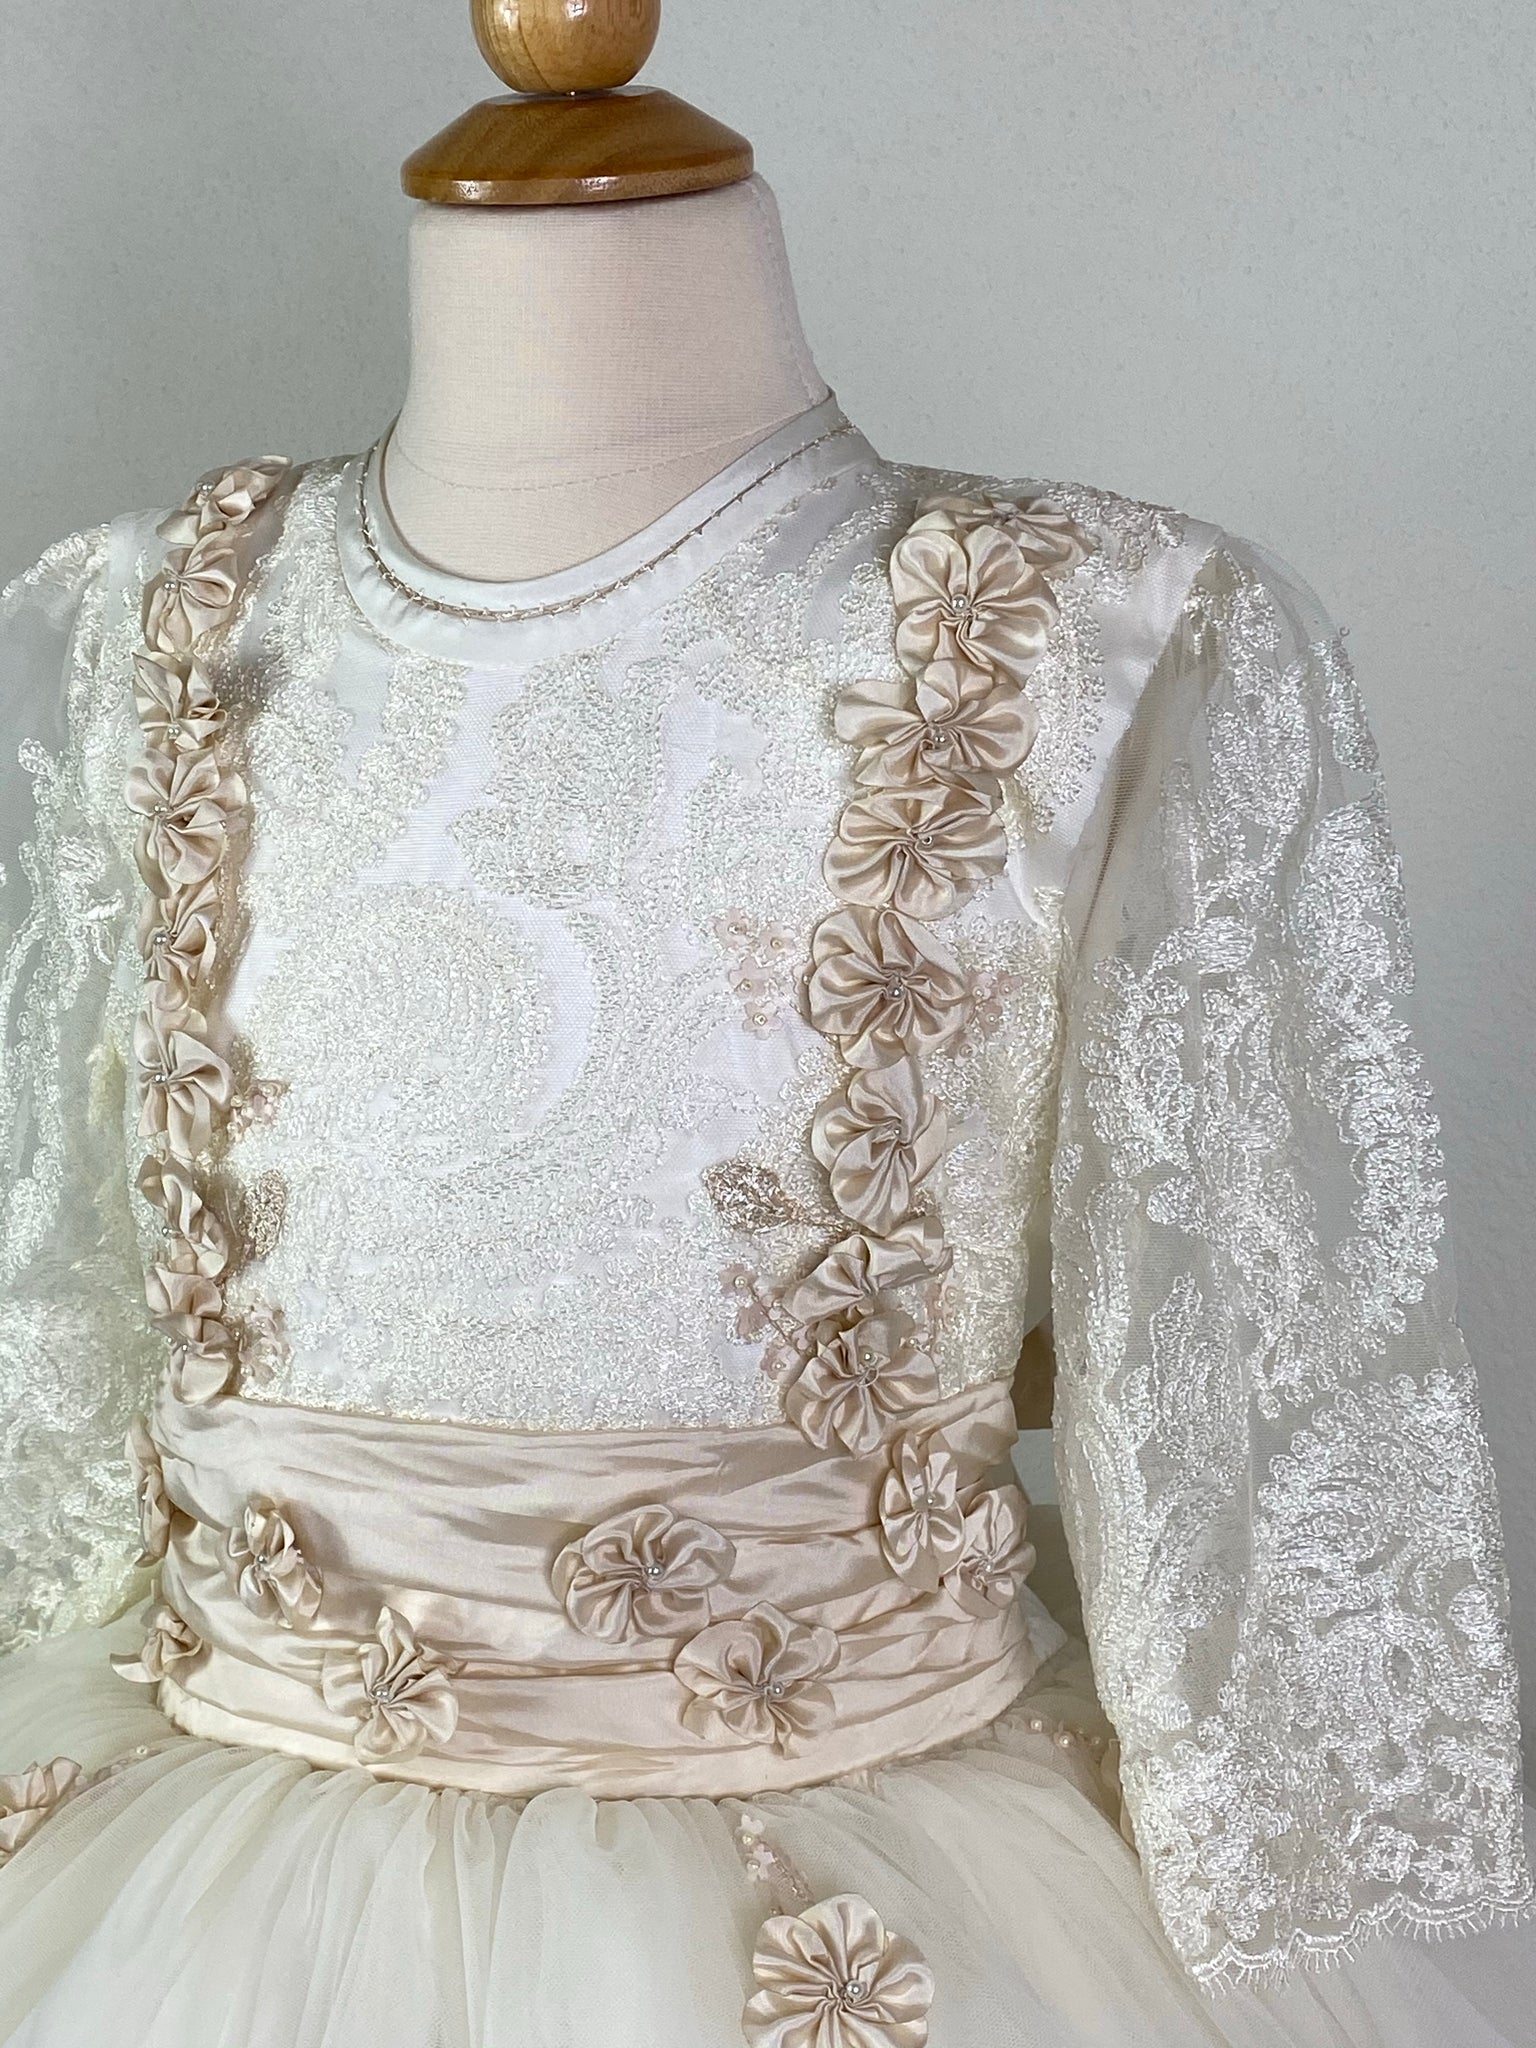 Ivory, size 10 3/4th ivory lace sleeve Hand stitched trim along neckline Embroidered lace bodice with floral stripes Small pearls in all flower detailing Champagne cummerbund with Champagne flowers within Layered tulle skirting with scattered Champagne flowers Pearl button closure Champagne satin ribbon for large bow